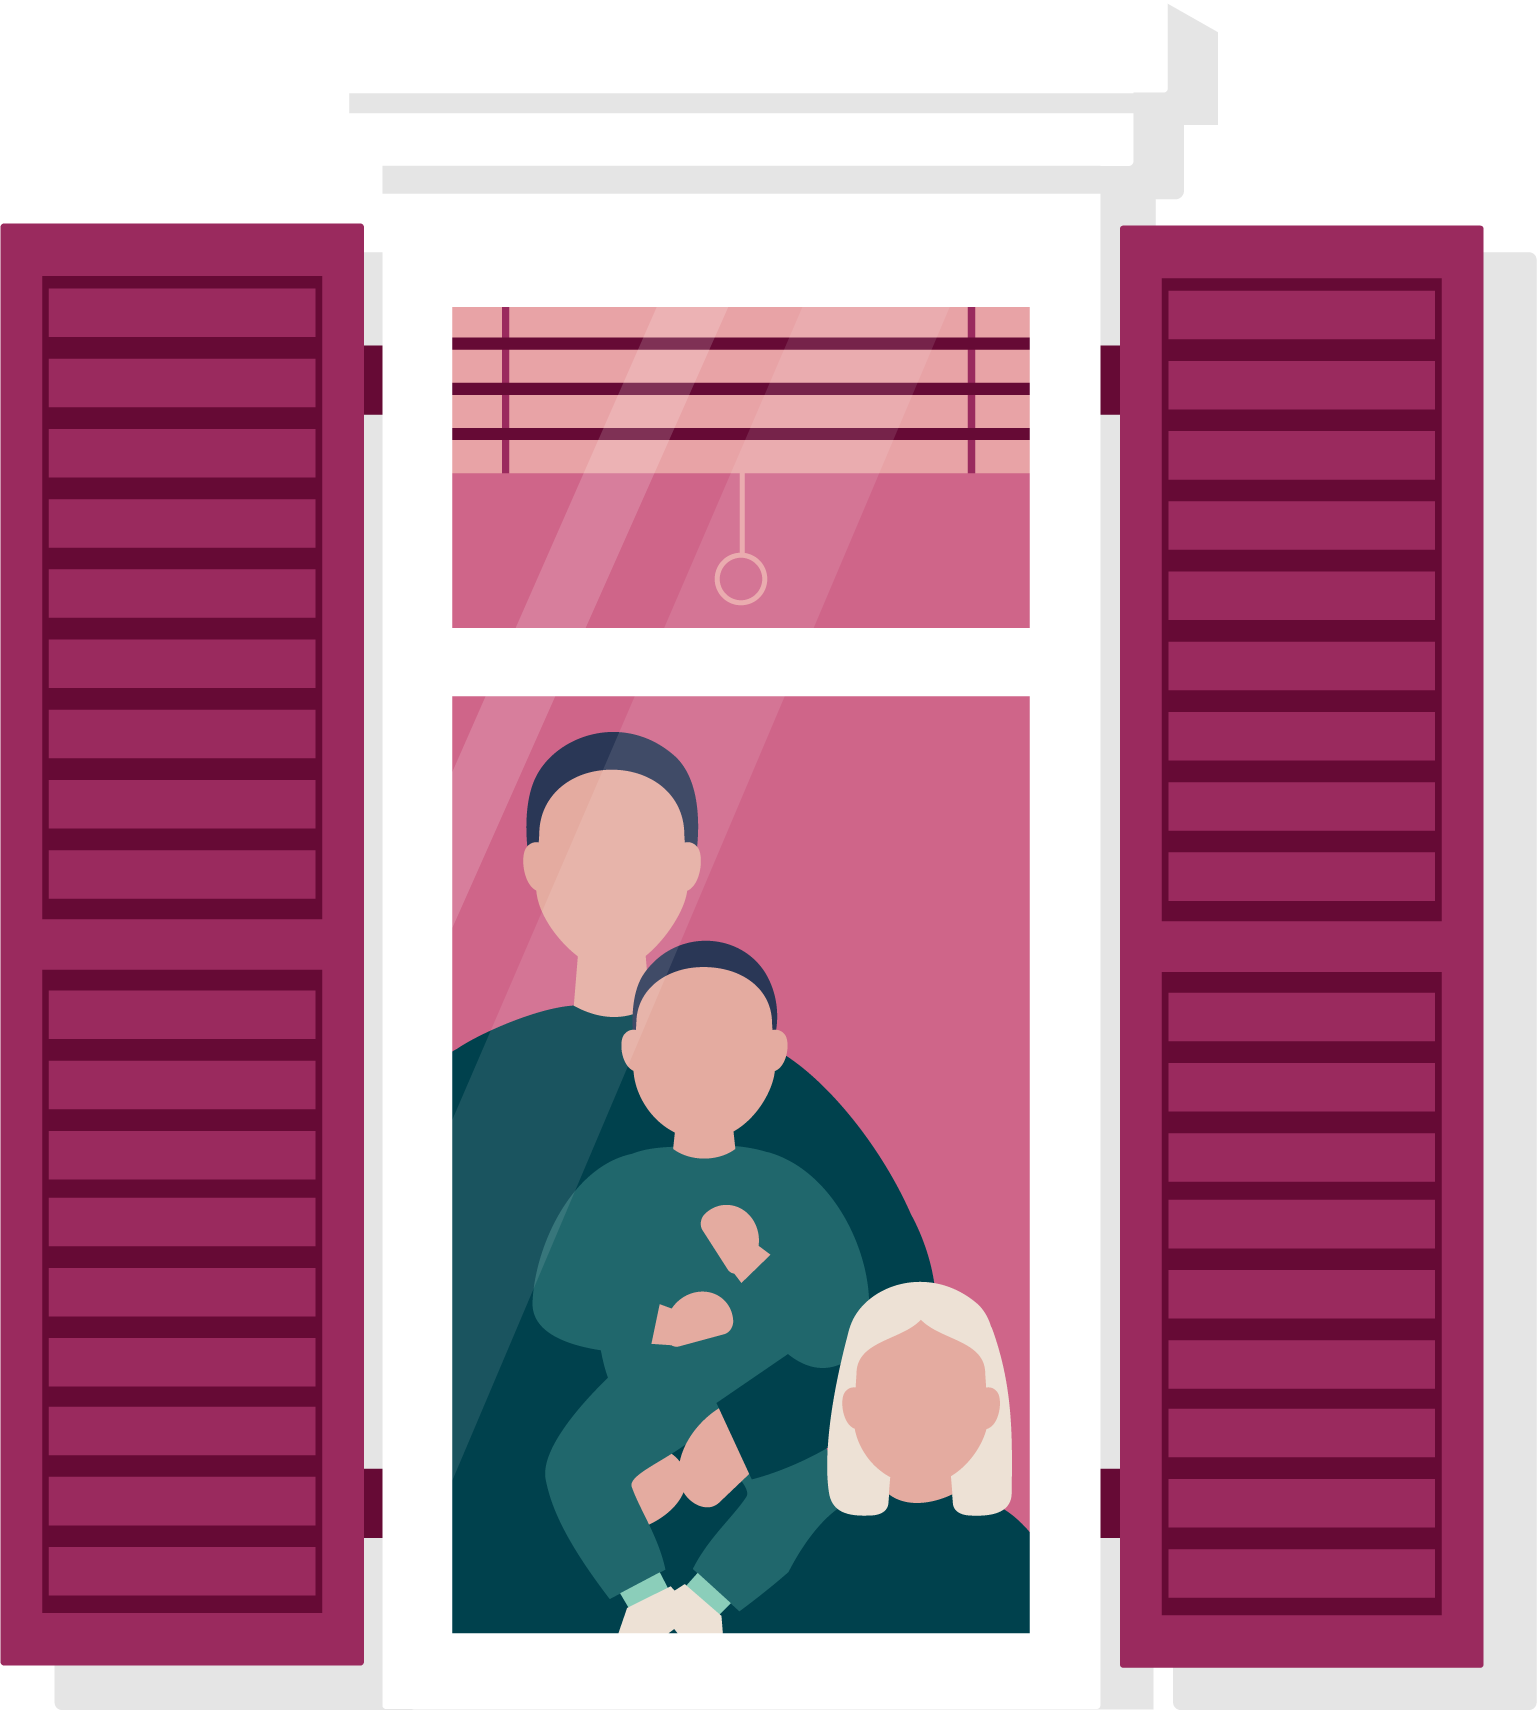 A window with open blinds, open shutters, and a family.